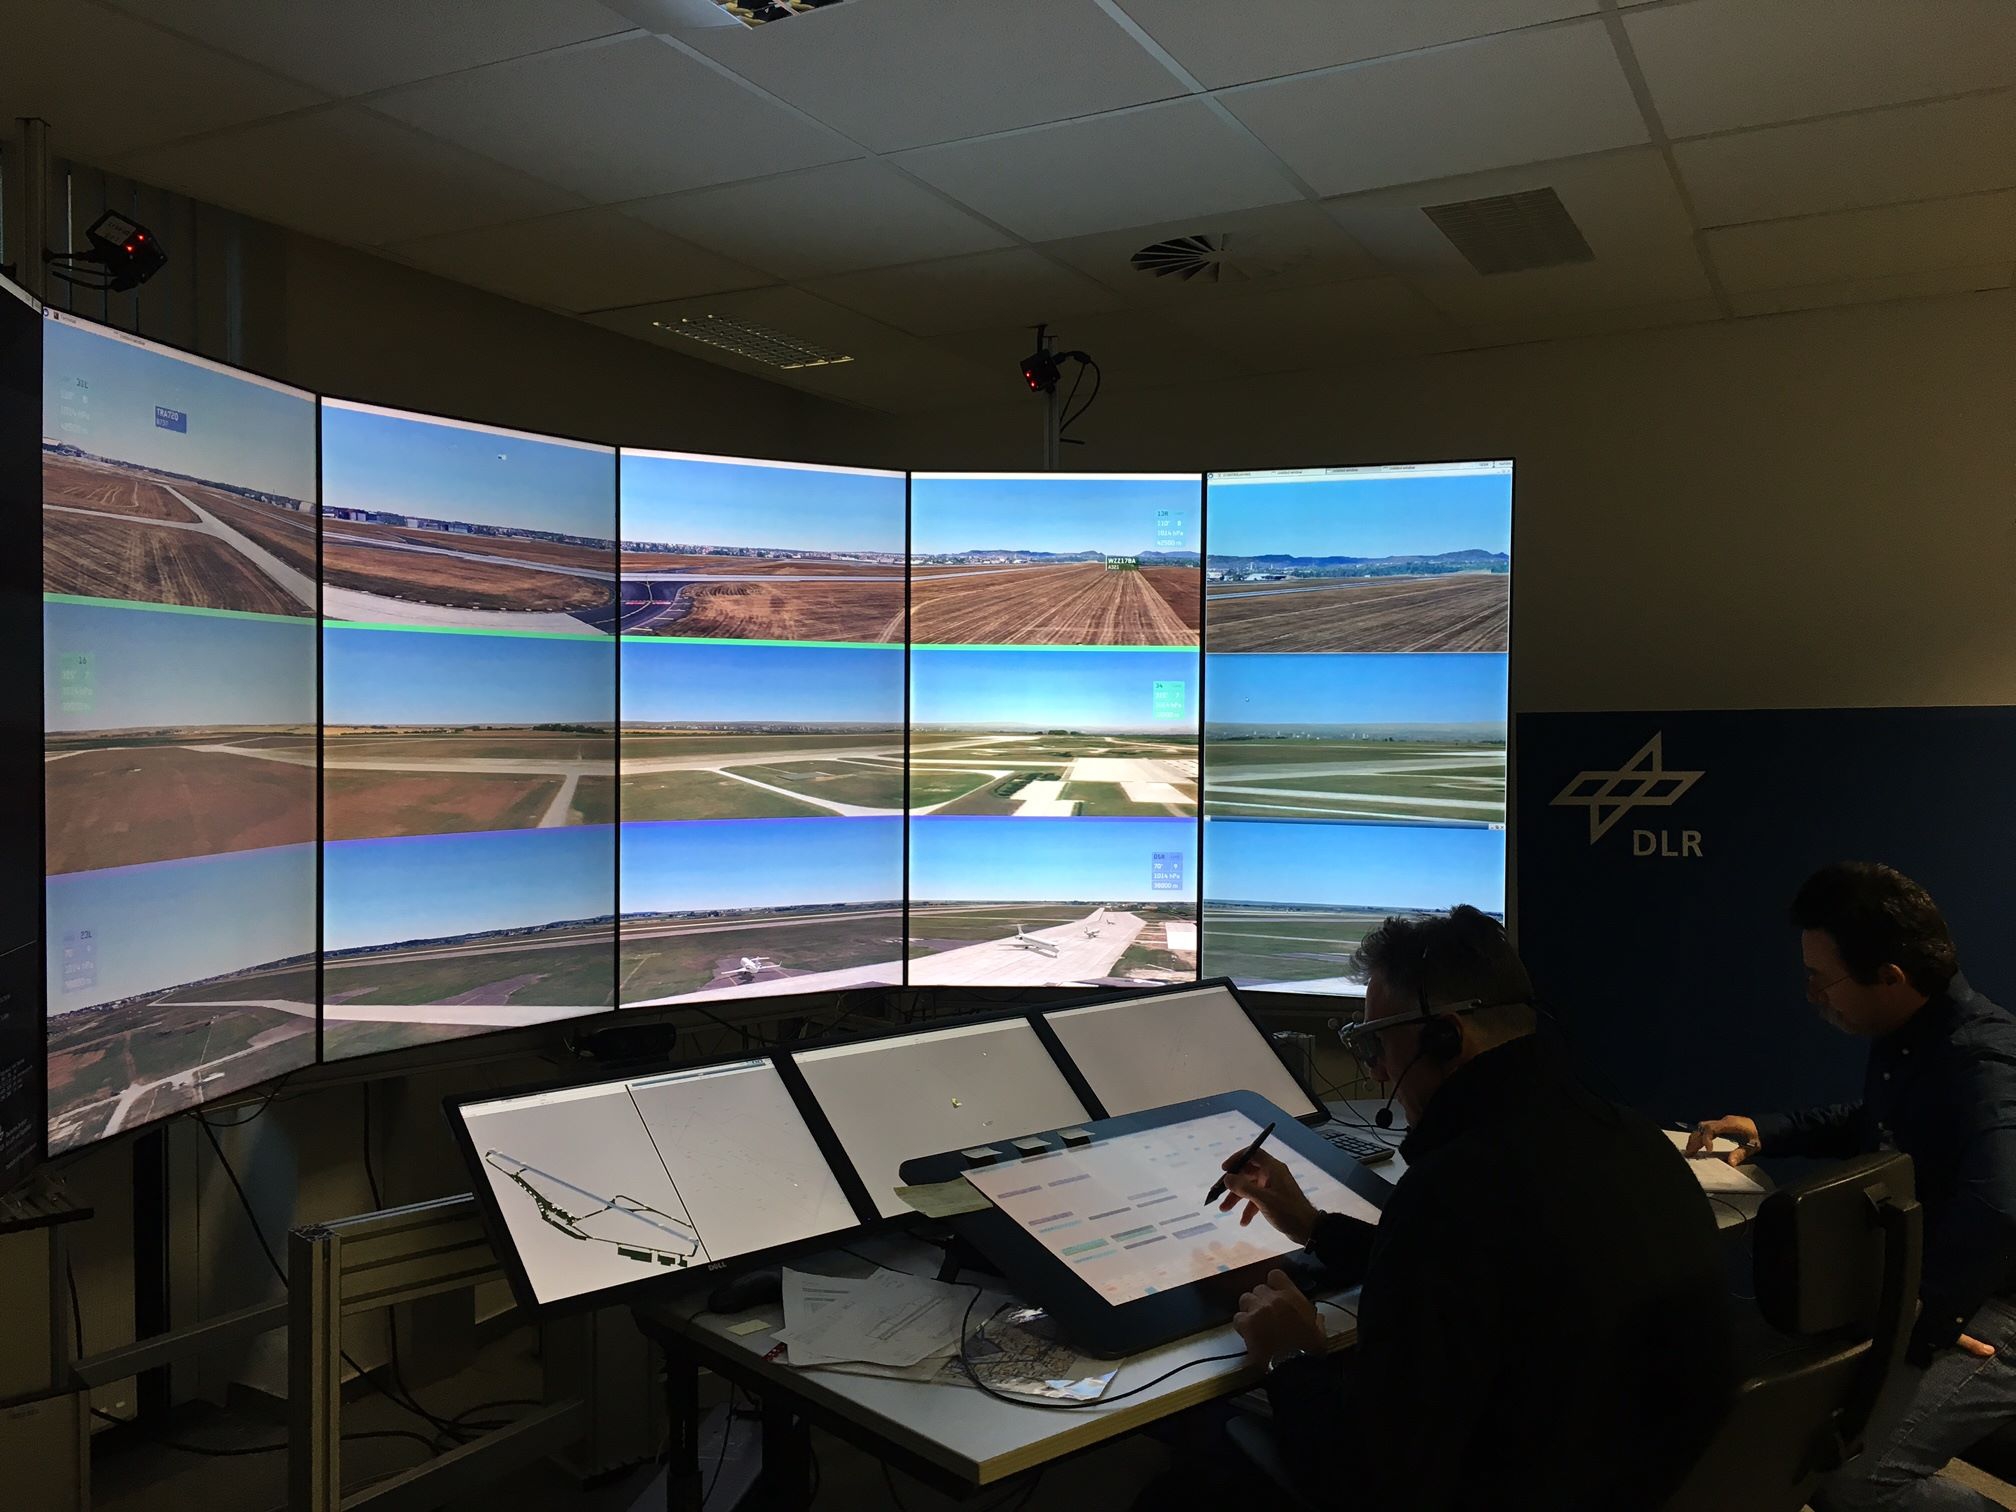 Successful first SESAR 2020 Multiple Remote Tower validation for three airports